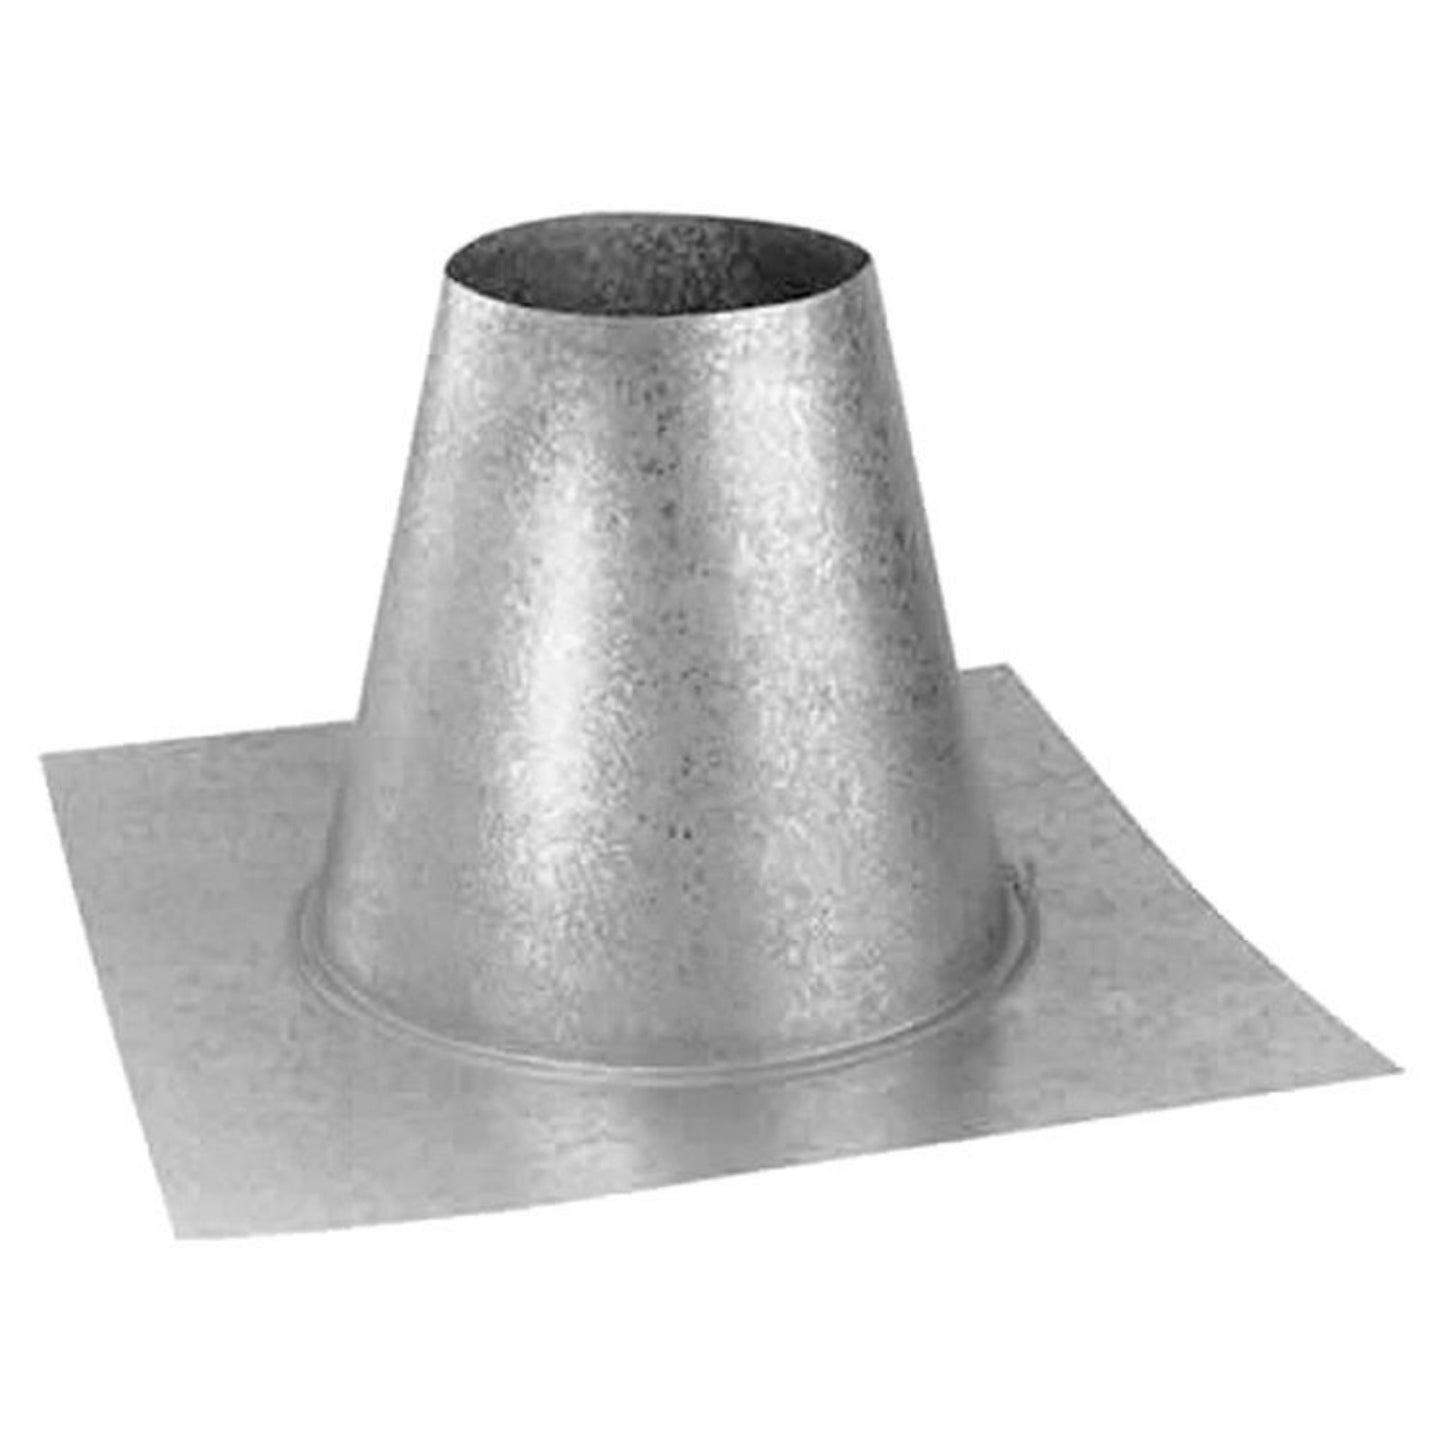 DuraVent DuraTech 20" Diameter Flat Roof Tall Cone Flashing